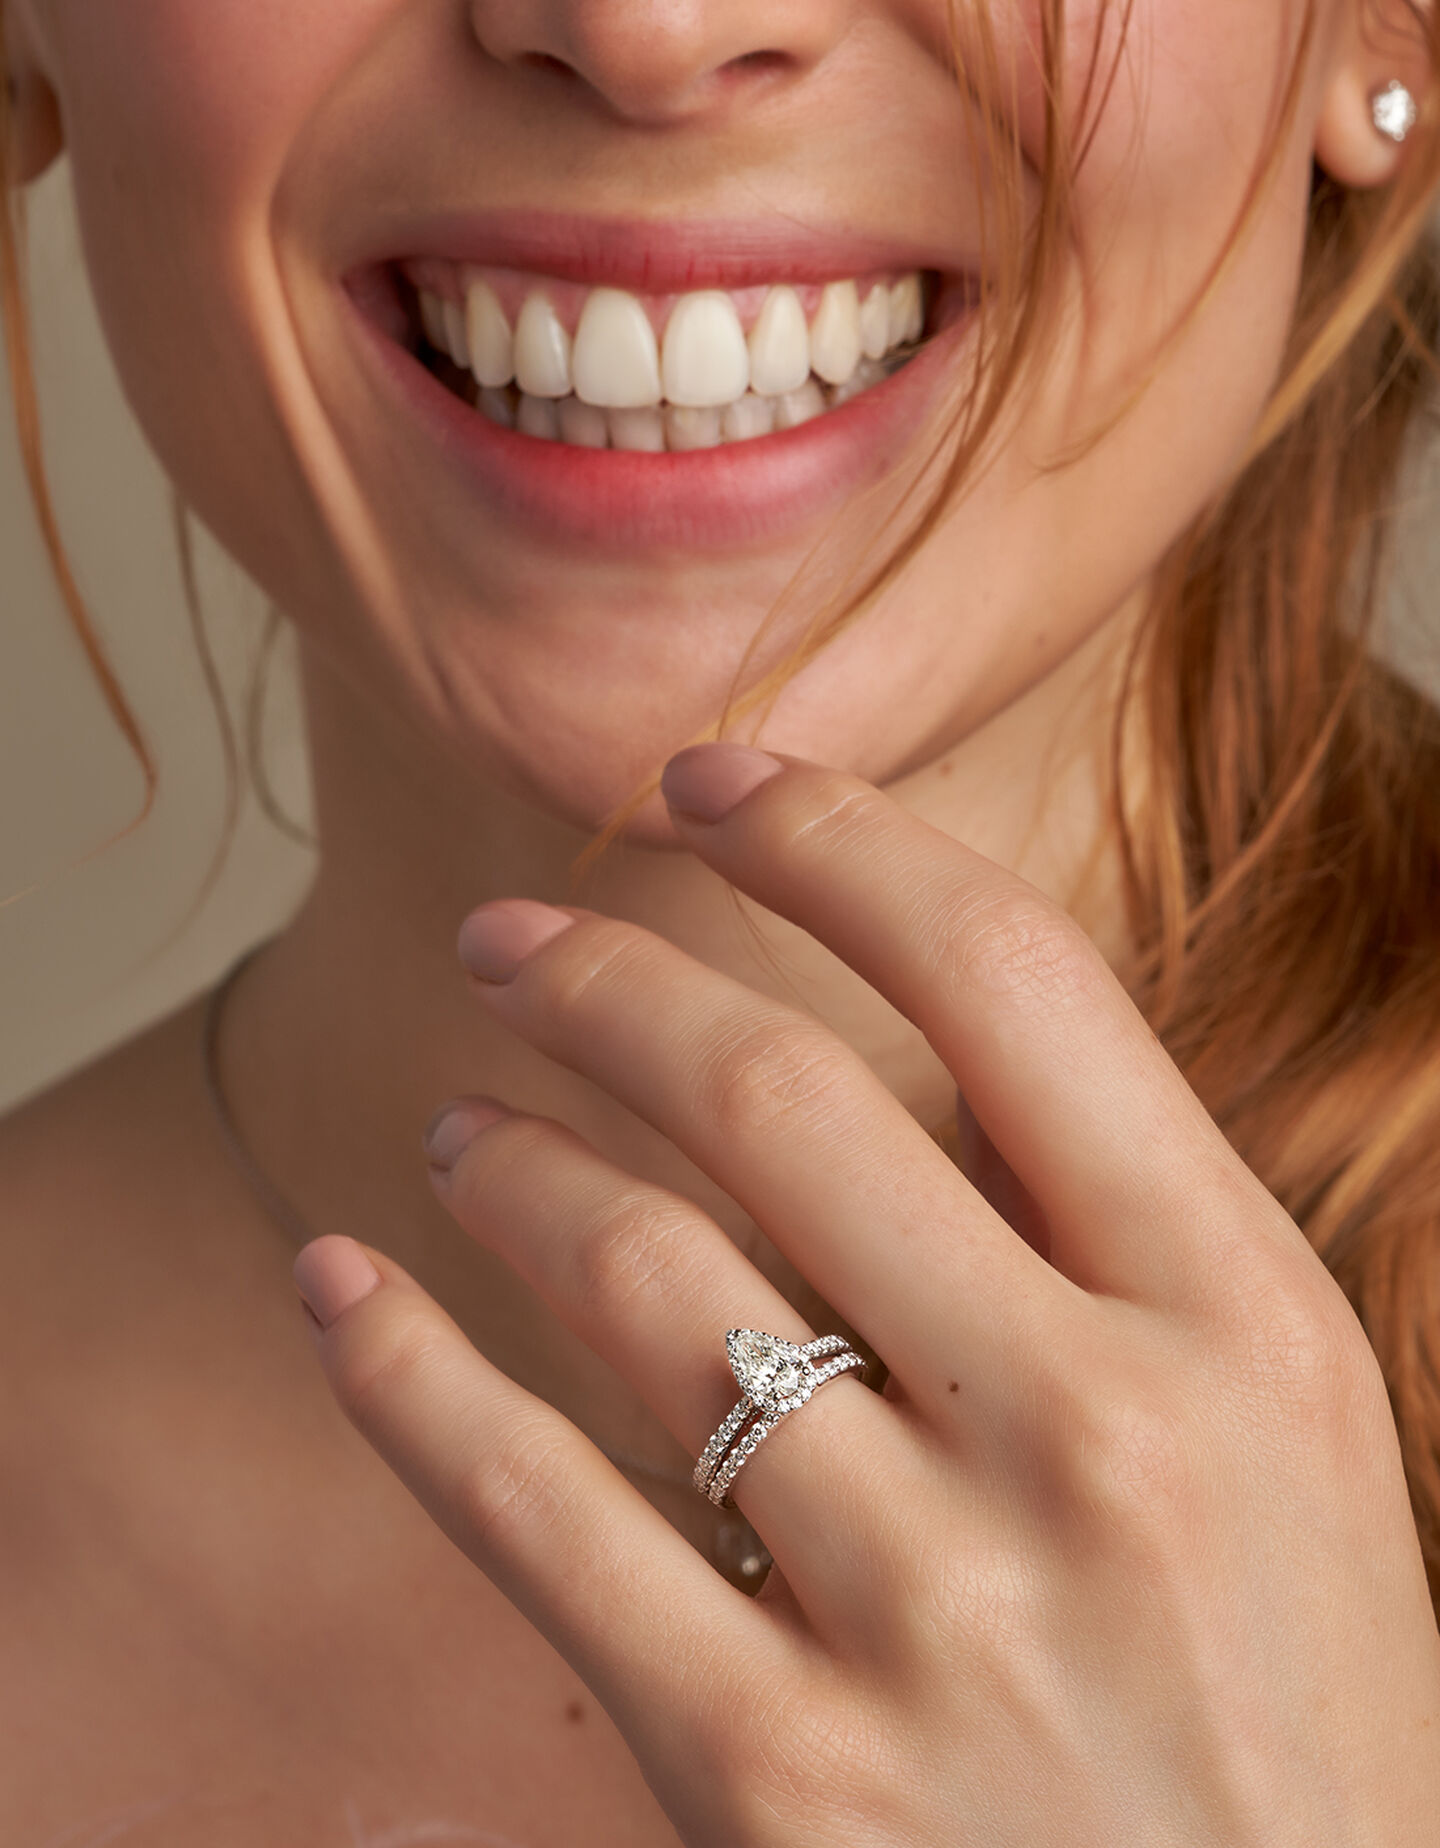 A woman smiling with a Birks diamond engagement ring and wedding band.